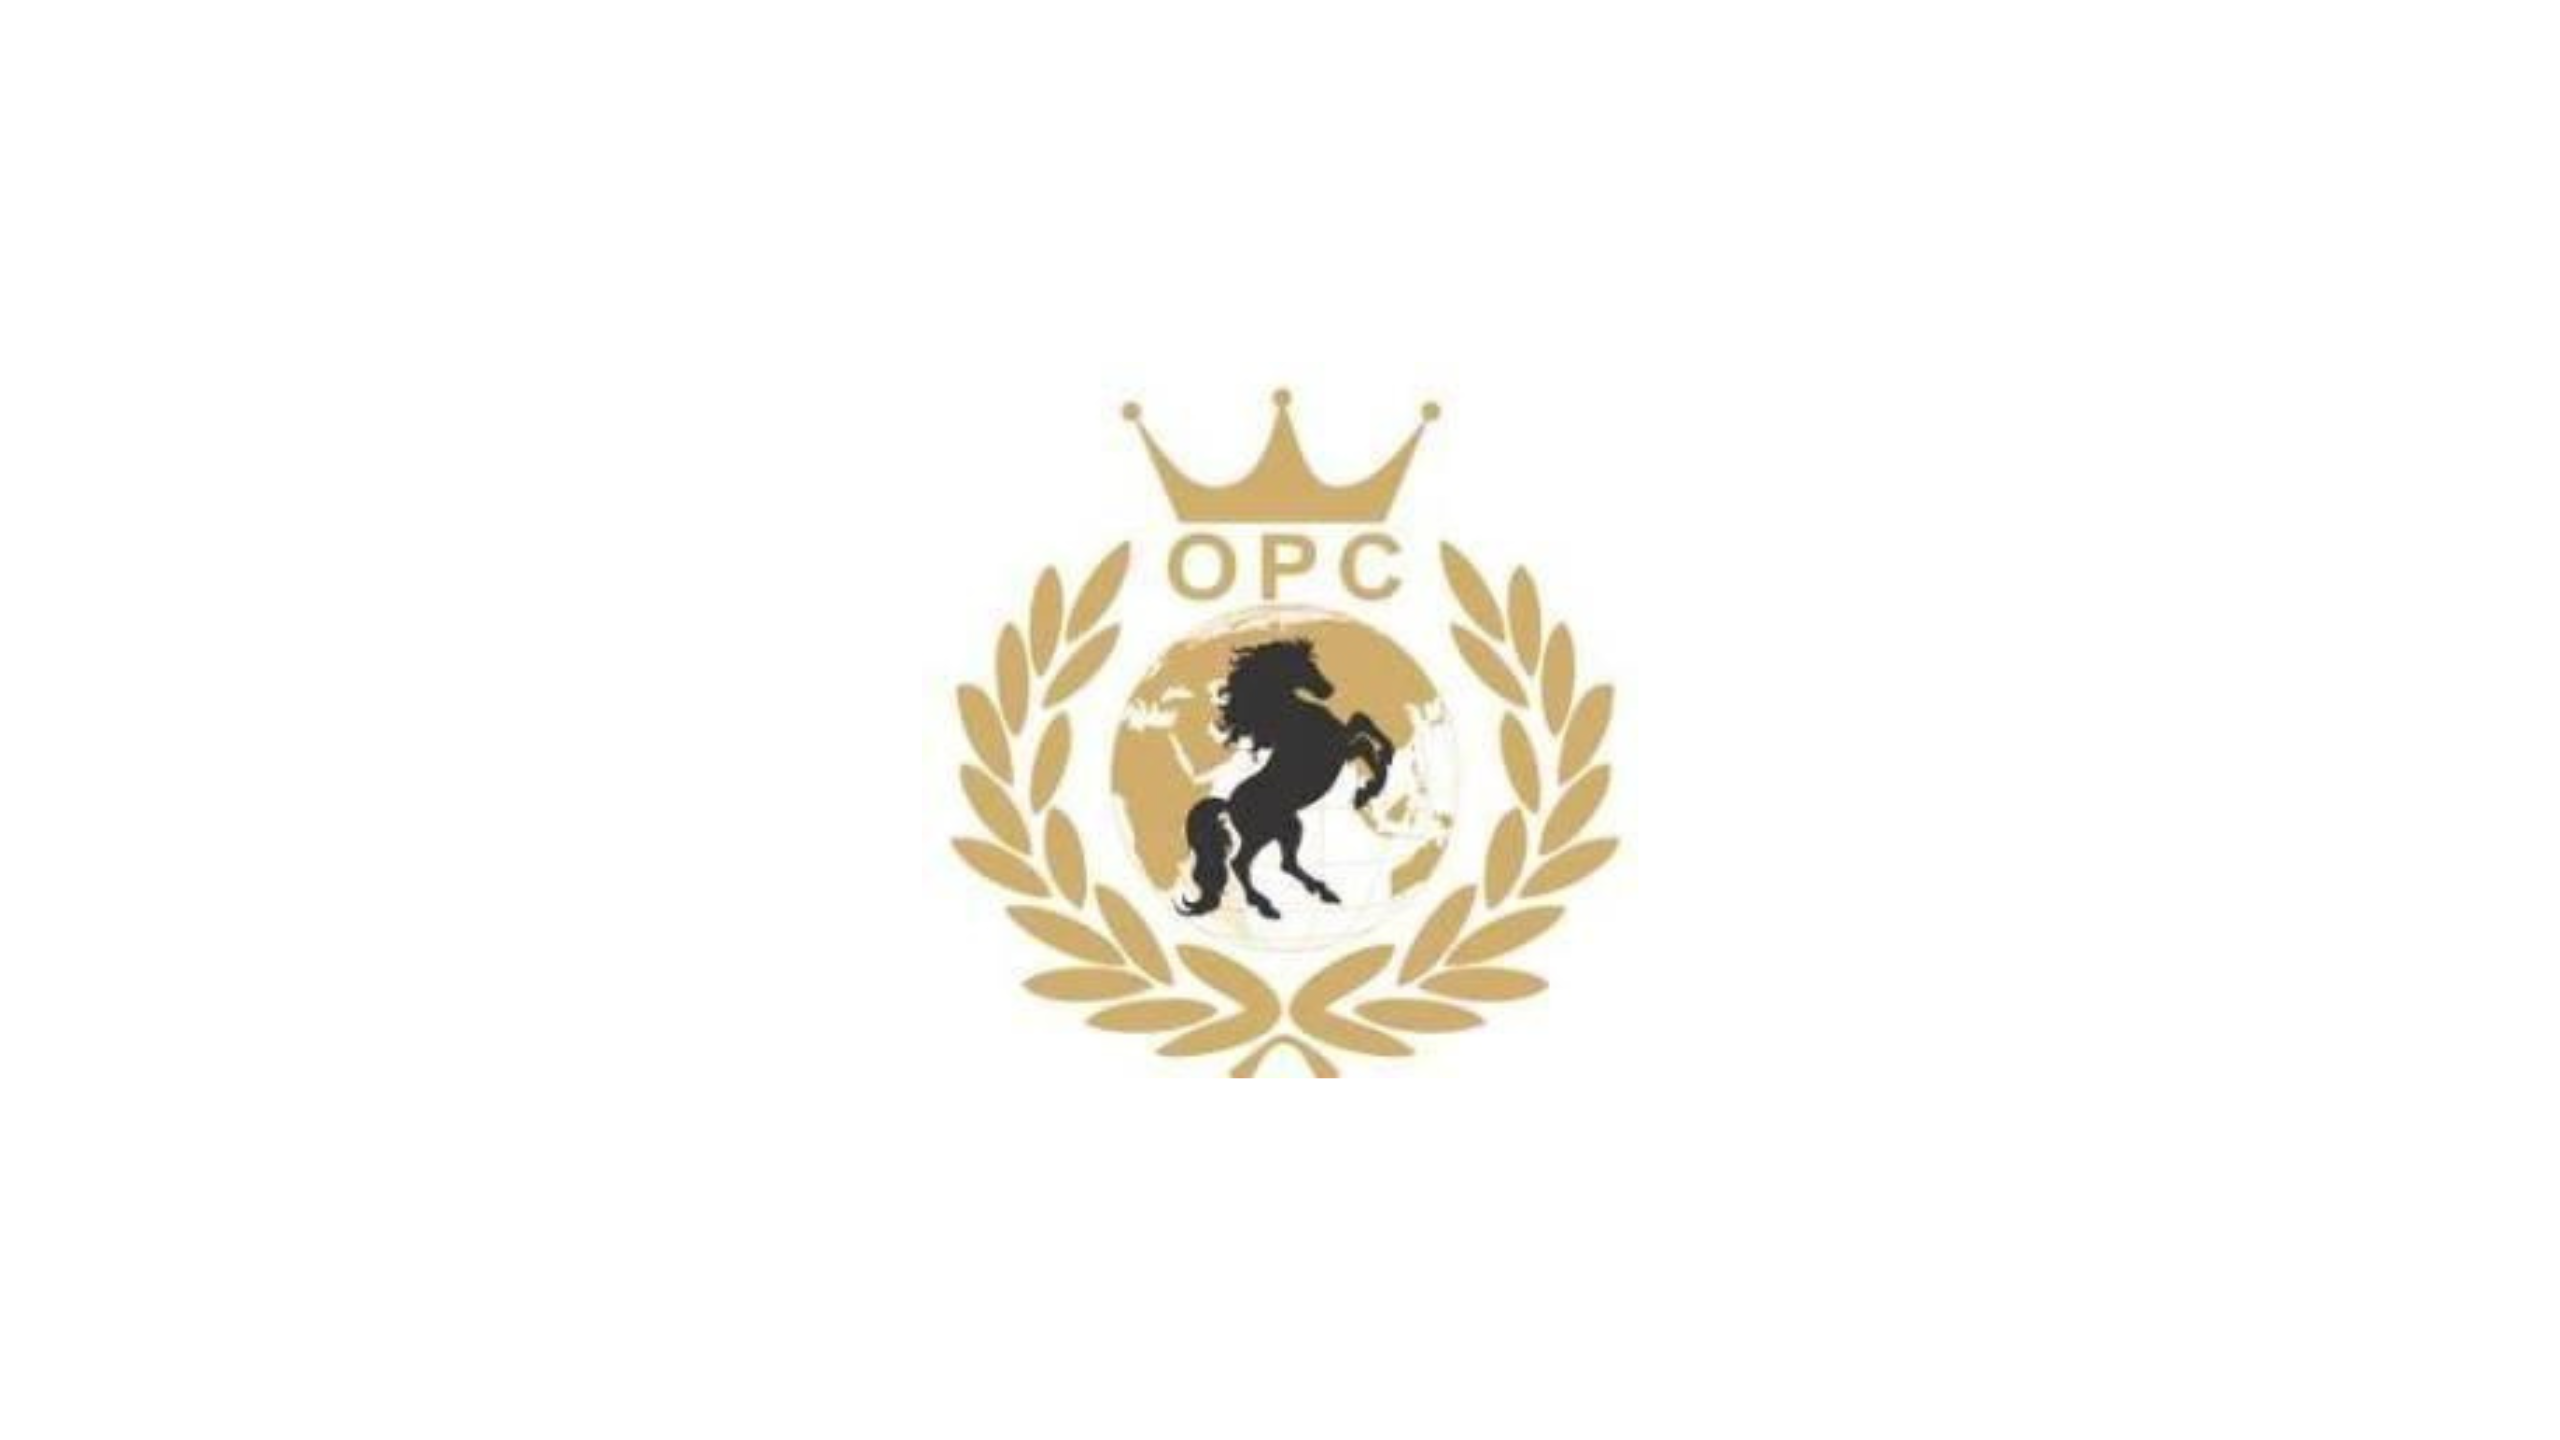 OPC Resources Sdn Bhd